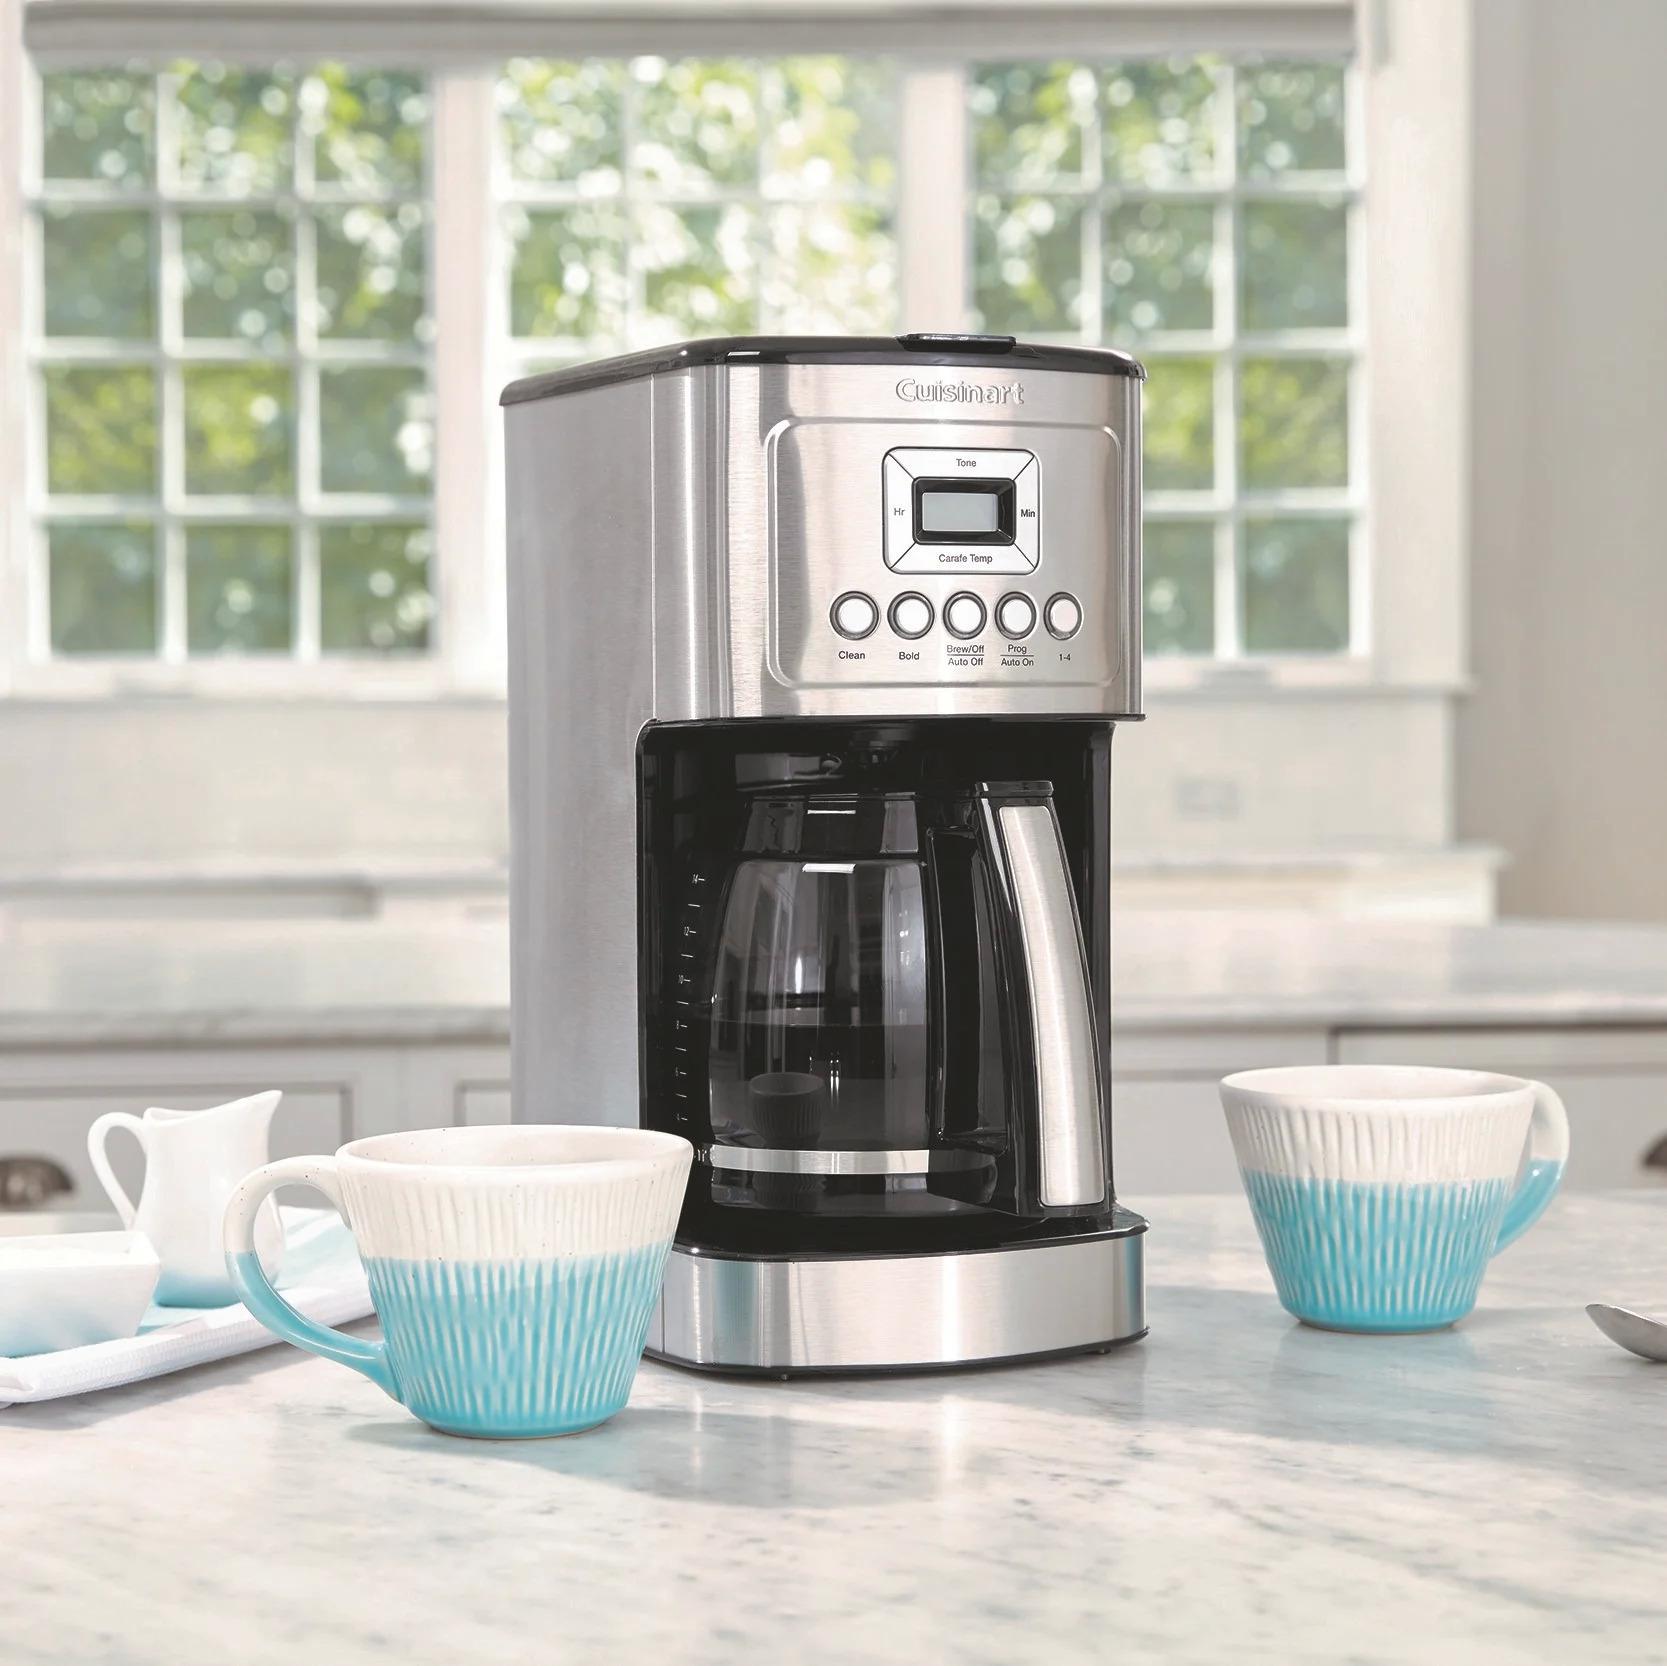 Cuisinart CBC-7000PCFR 14 Cup Programmable Coffee Maker for $39.99 Shipped